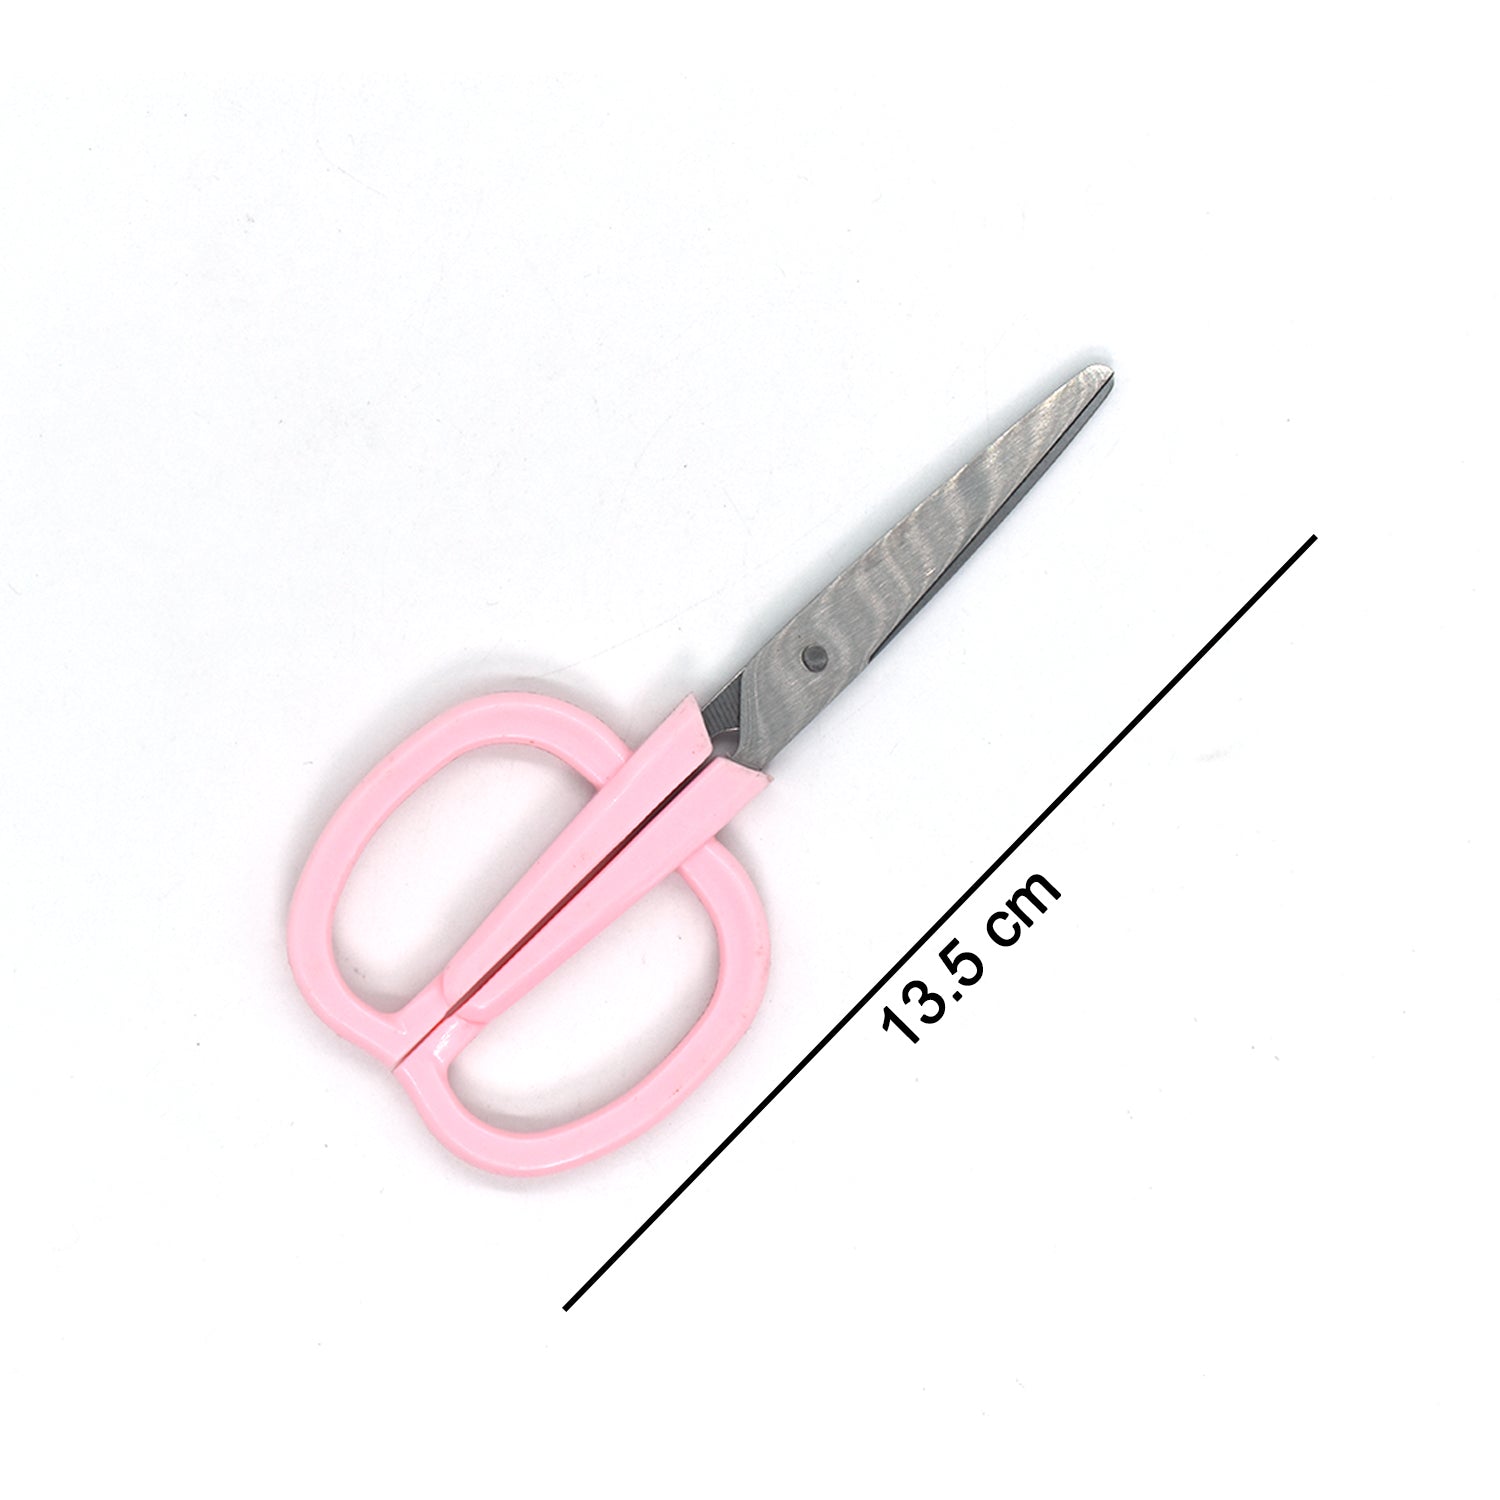 7441 Multipurpose Scissors Comfort Grip Handles Used in Home and Office